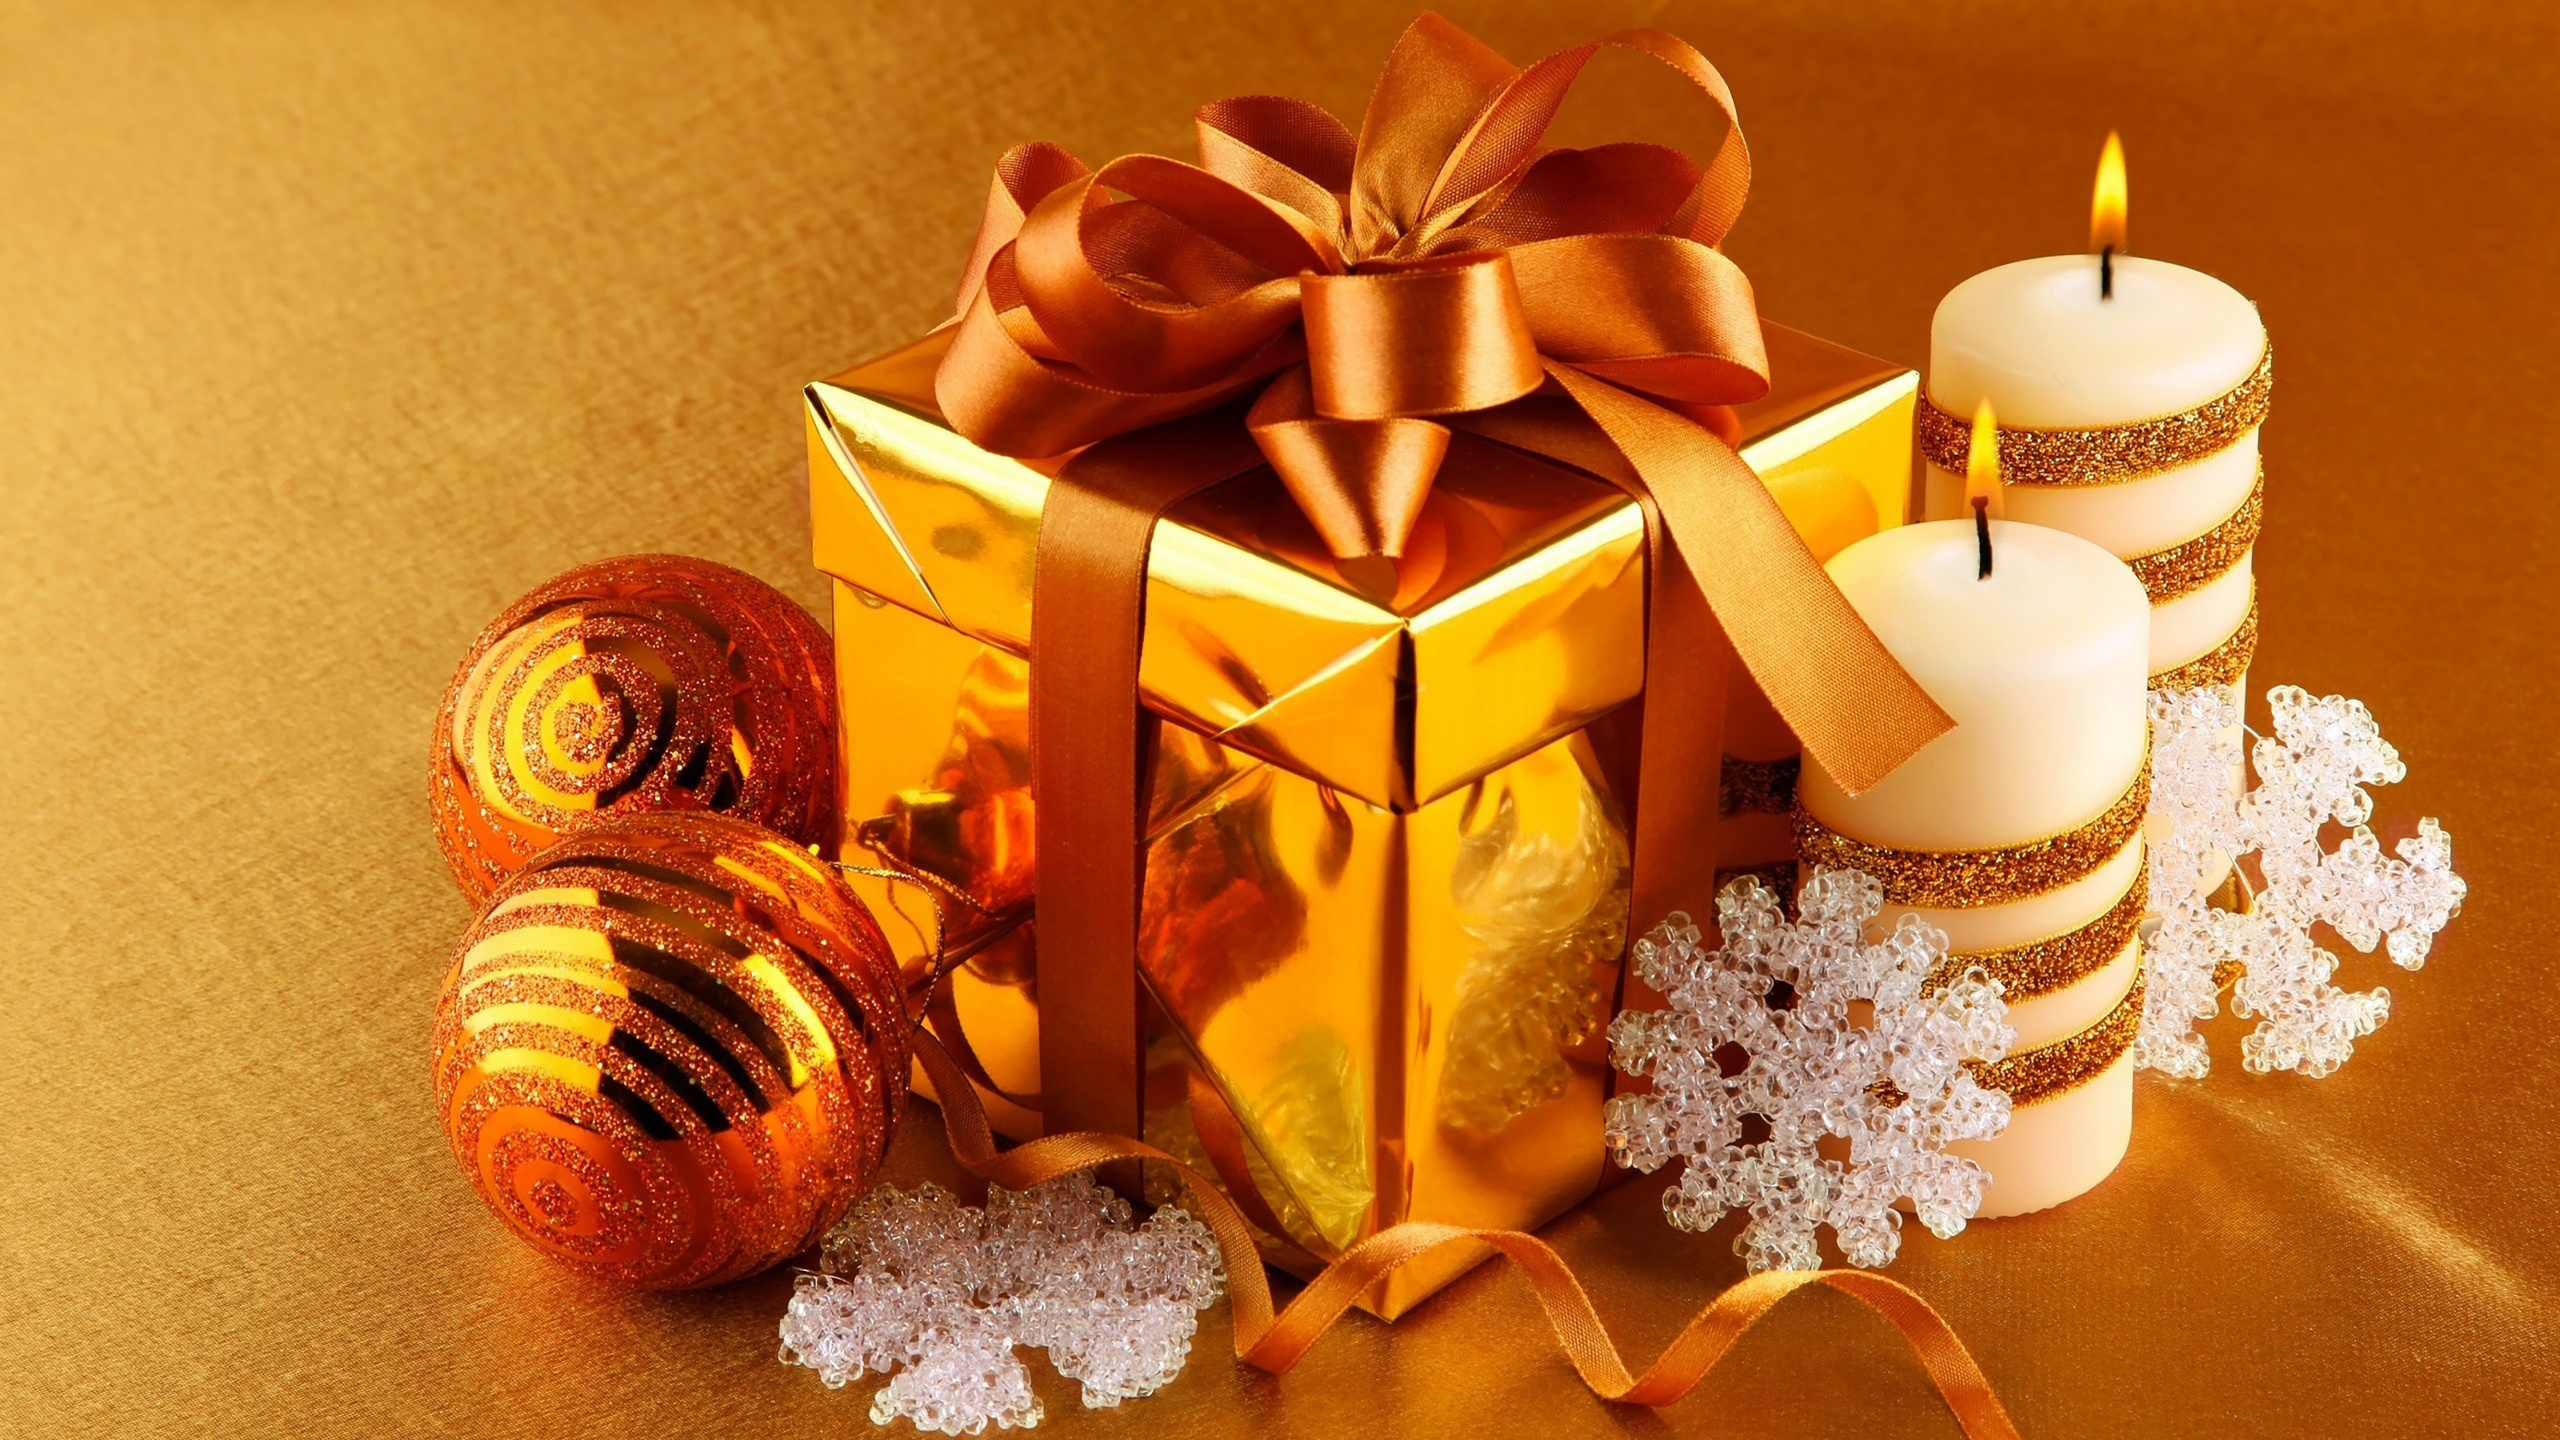 Christmas Day, Christmas Ornament, Present, Christmas Decoration, Gift Wrapping. Wallpaper in 2560x1440 Resolution